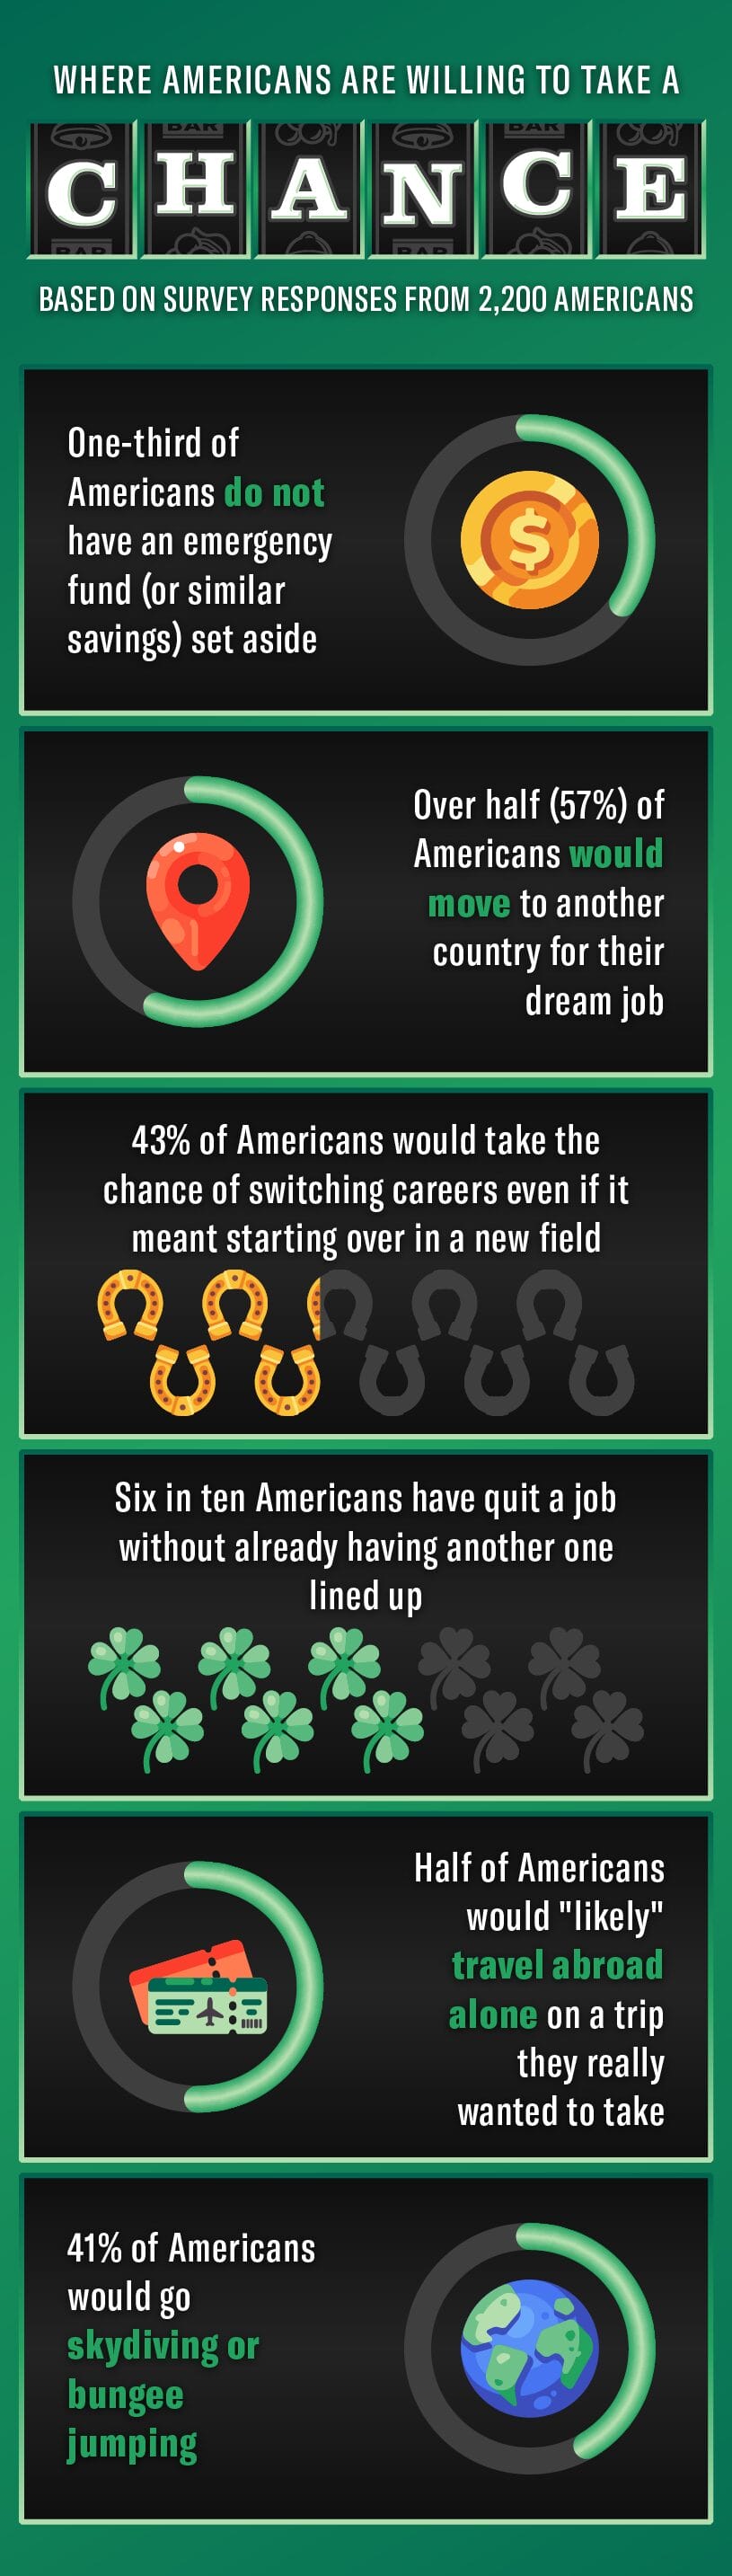 mobile-infographic-that-shows-survey-insights-about-the-things-Americans-are-most-willing-to-take-chances-on